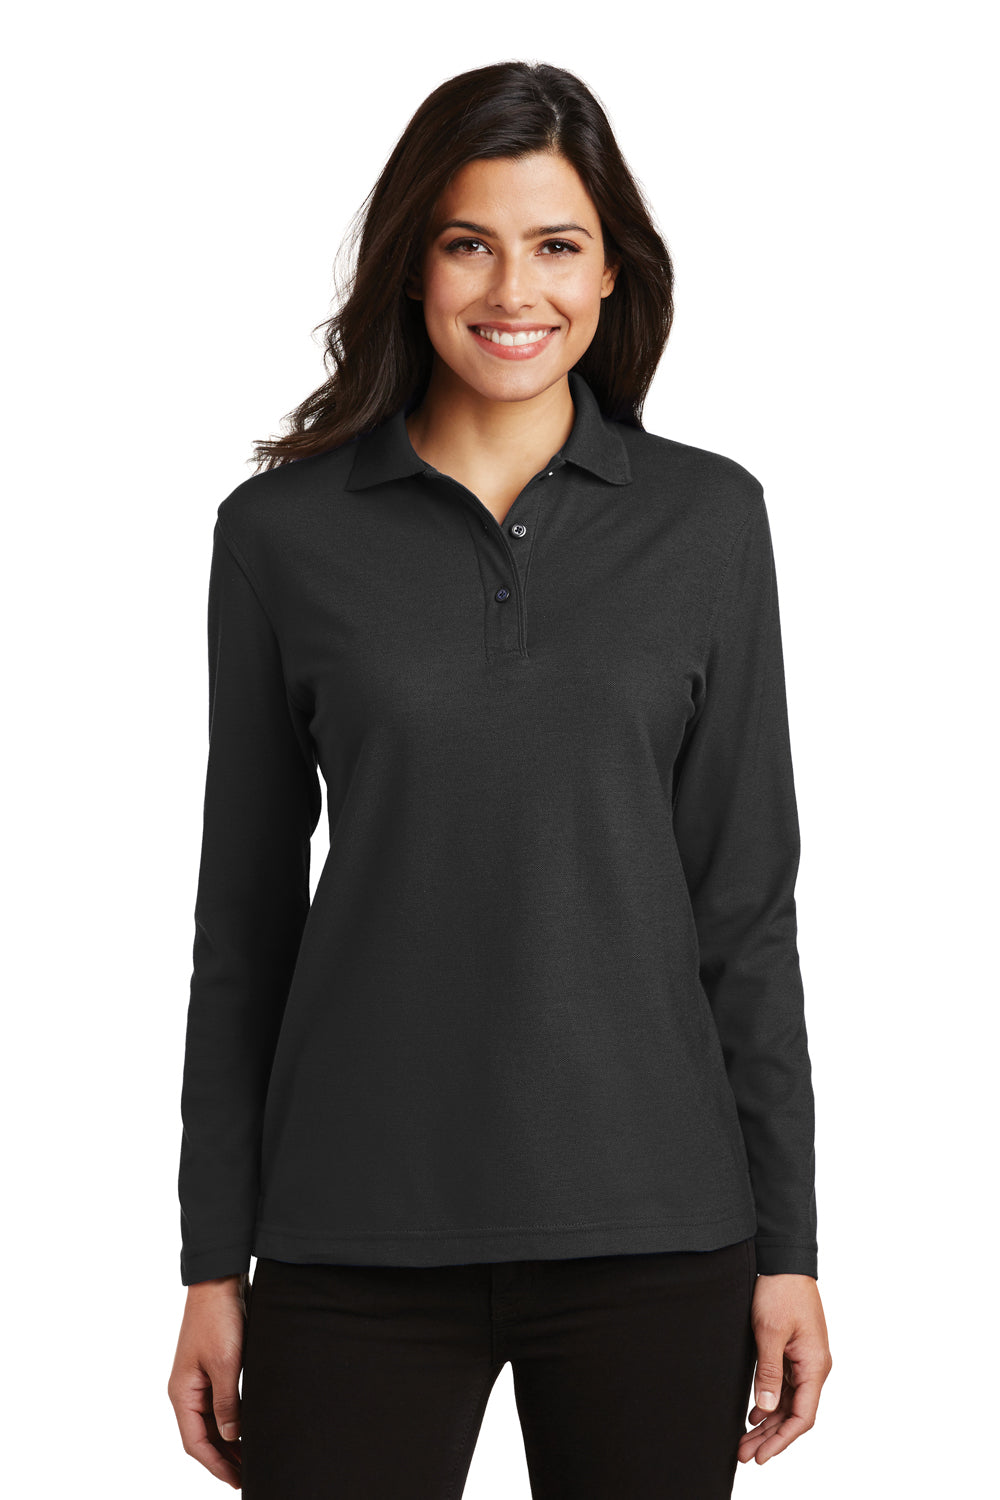 Port Authority L500LS Womens Silk Touch Wrinkle Resistant Long Sleeve Polo Shirt Black Front